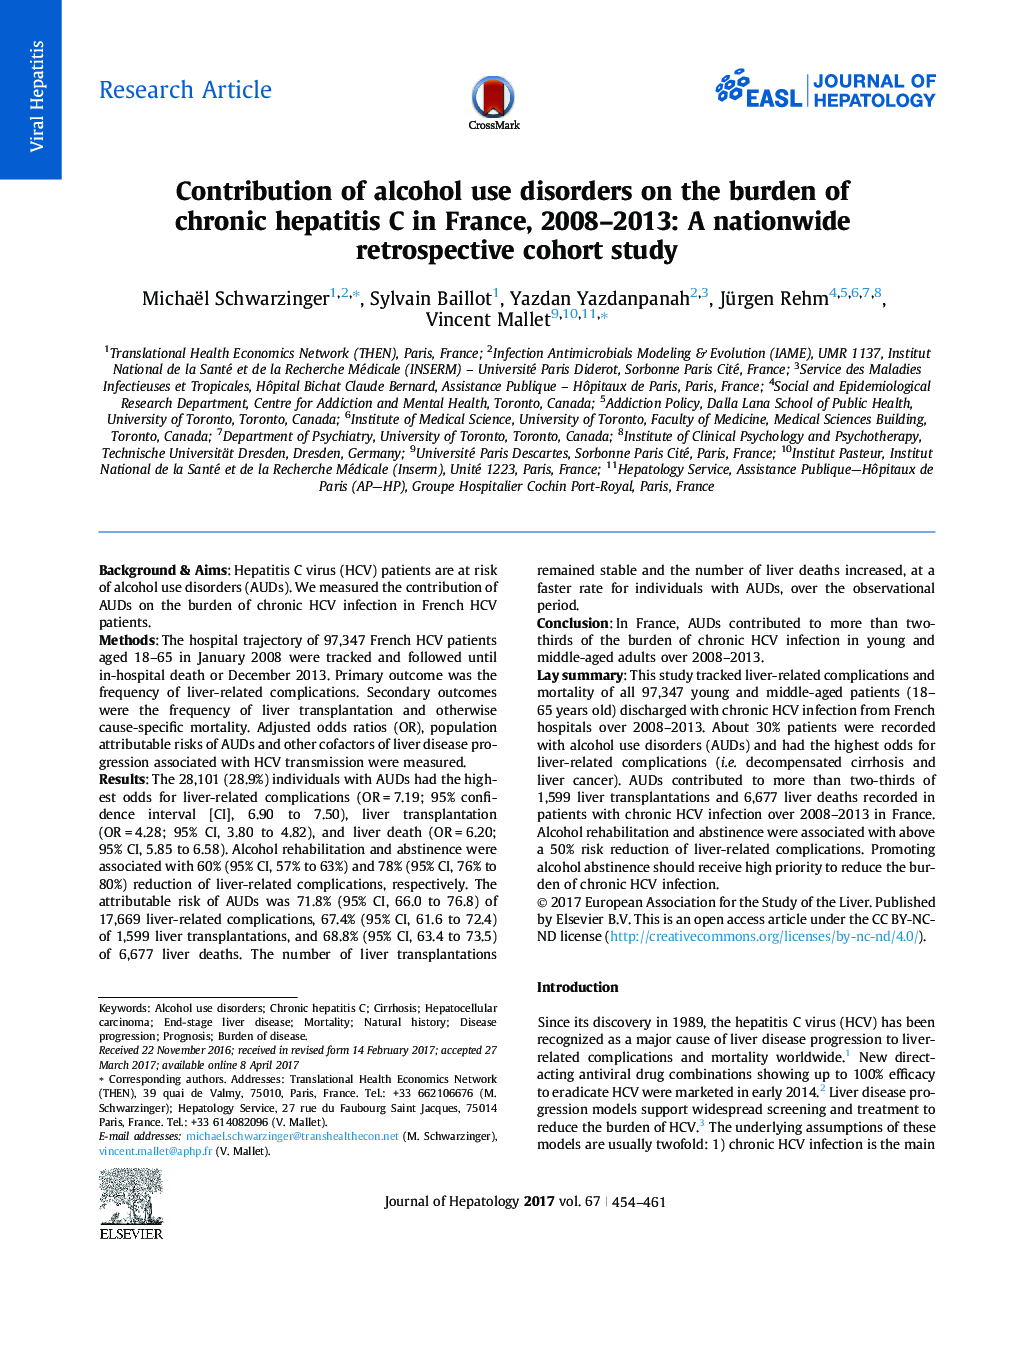 Contribution of alcohol use disorders on the burden of chronic hepatitis C in France, 2008-2013: A nationwide retrospective cohort study